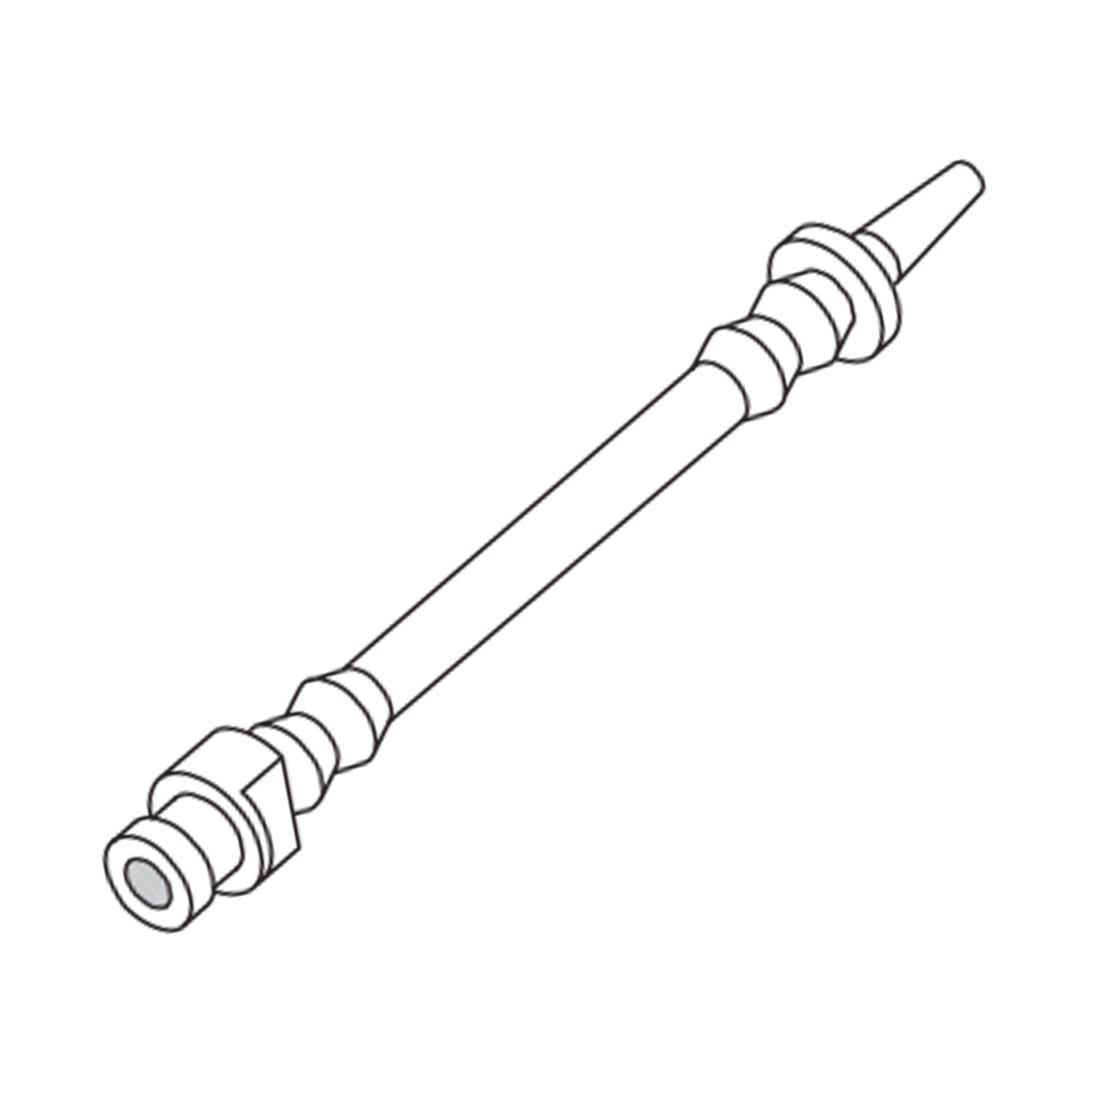 Pump Tubing With Connectors Autoclavable  Length:  85mm, Outside Diameter: 4mm